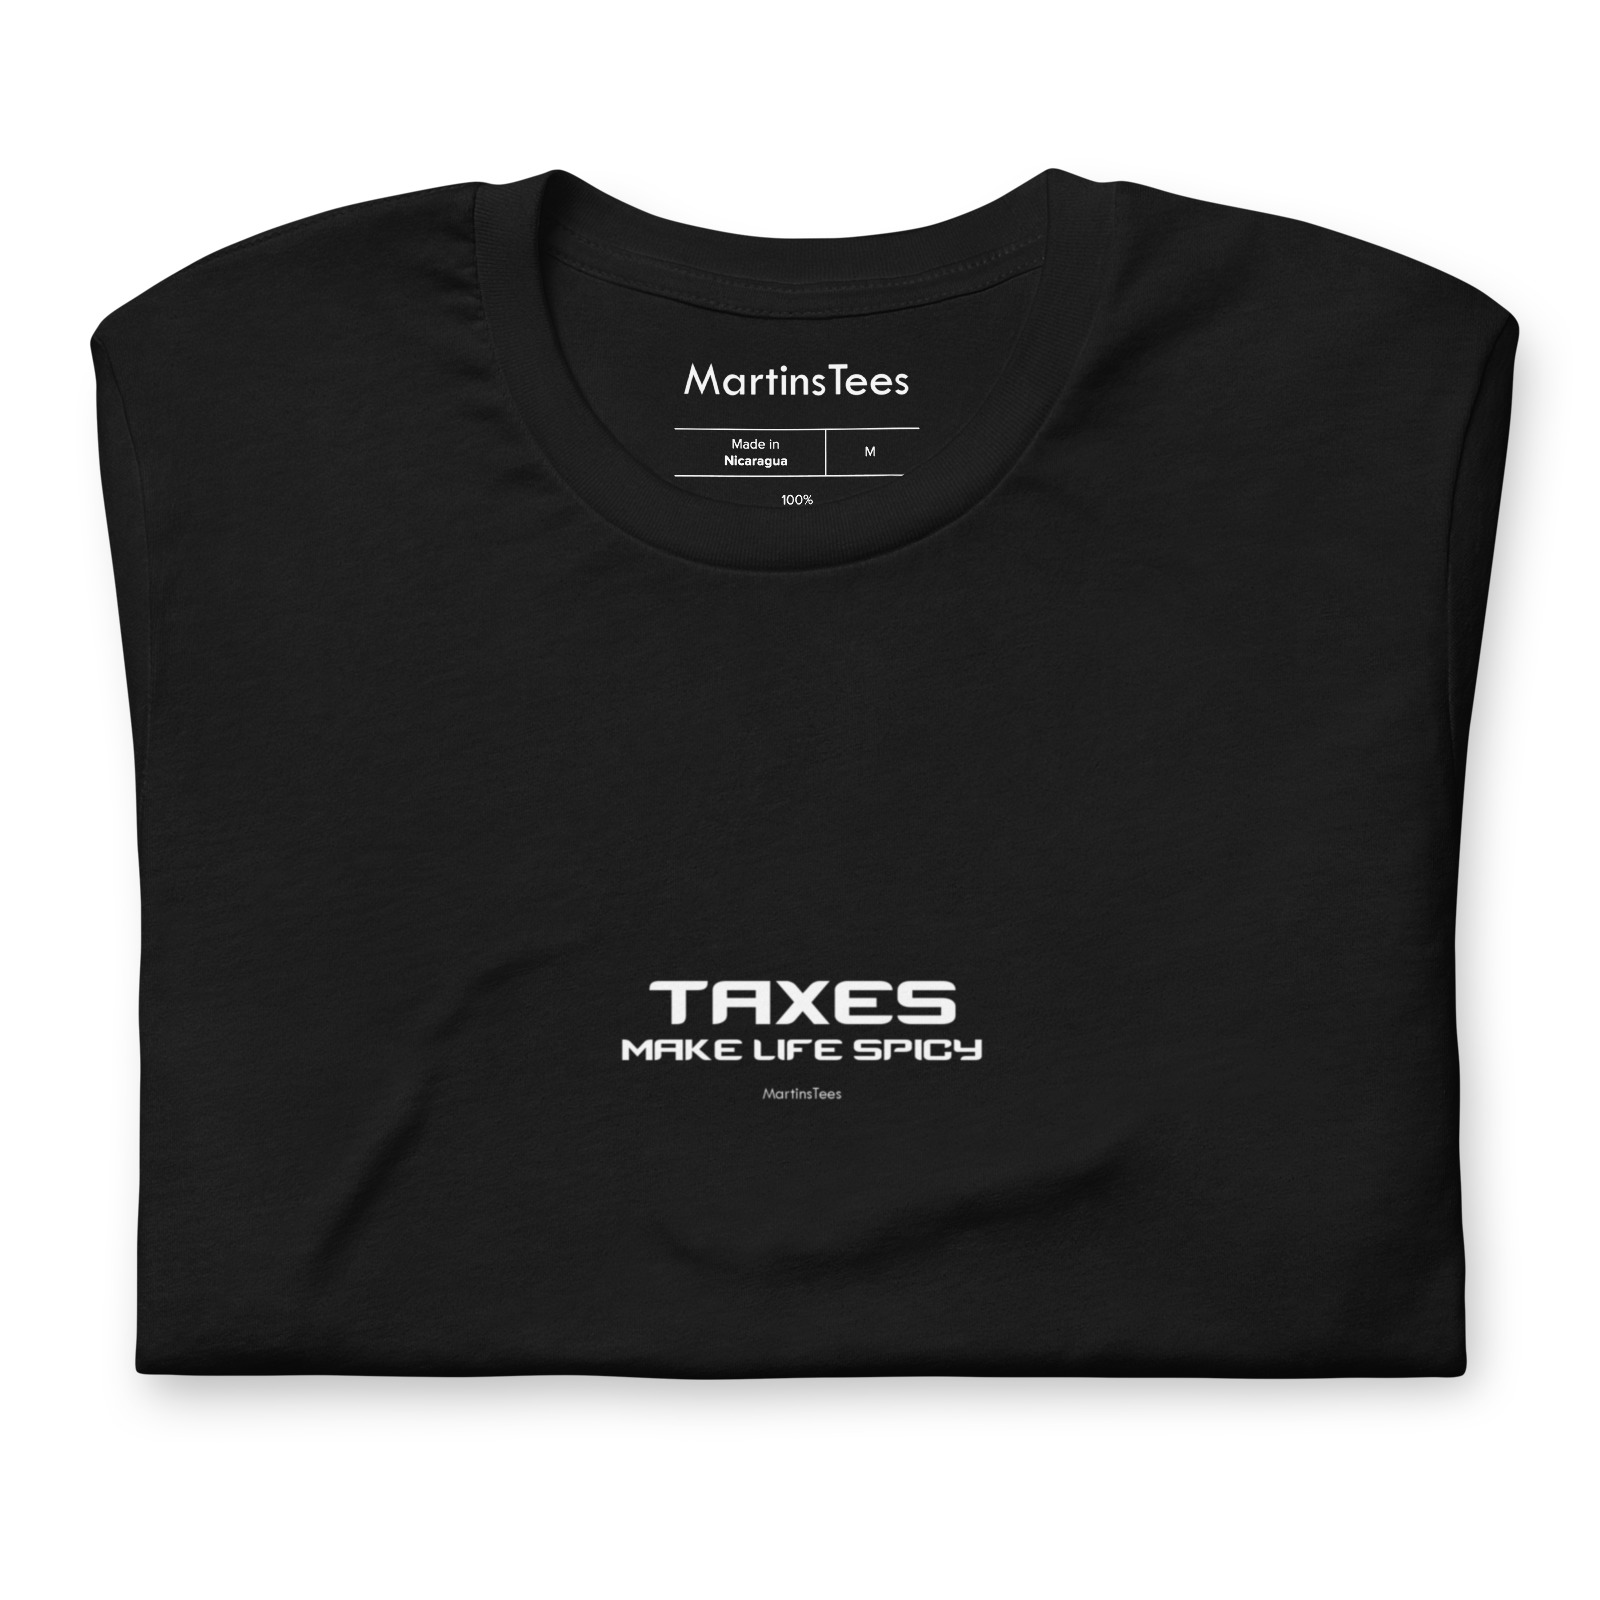 T-shirt: TAXES - MAKE LIFE SPICY